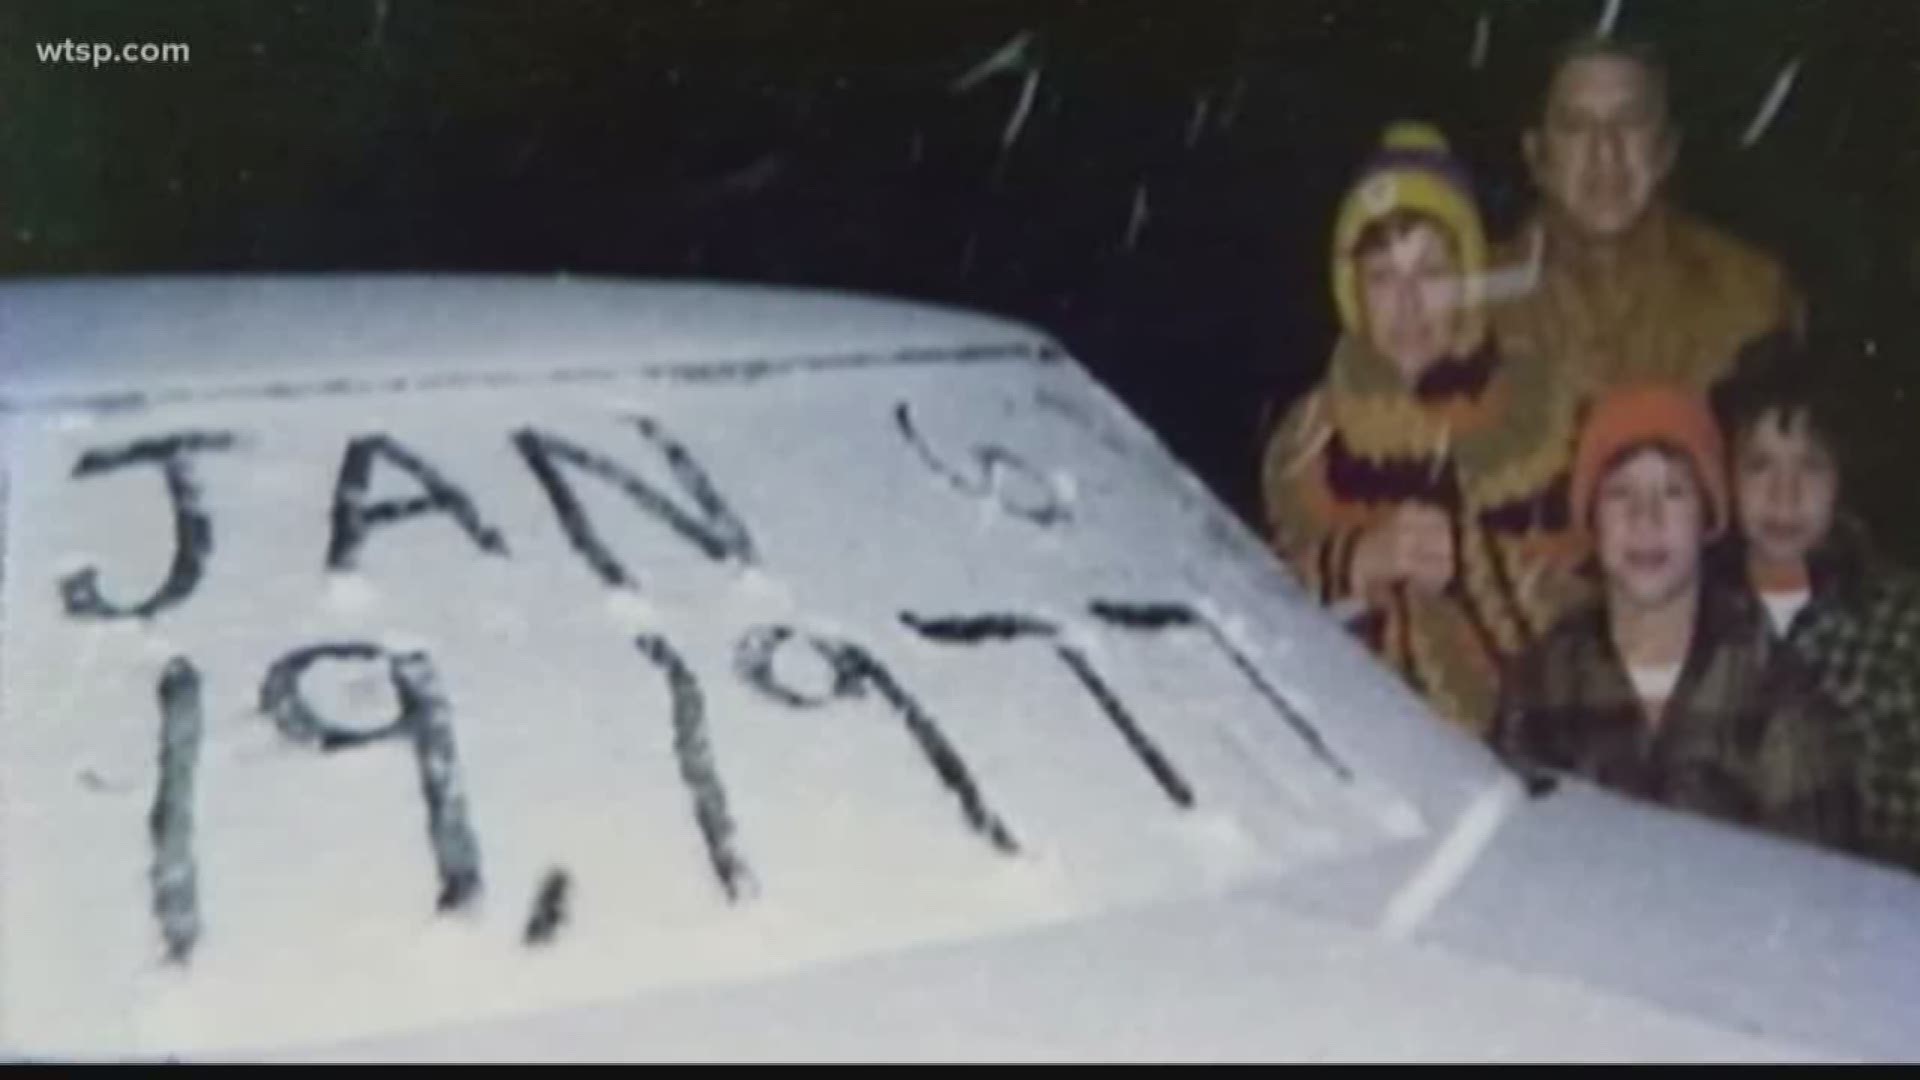 There were also a few flurries seen in 1989, but overall, snow in this part of Florida is pretty rare.